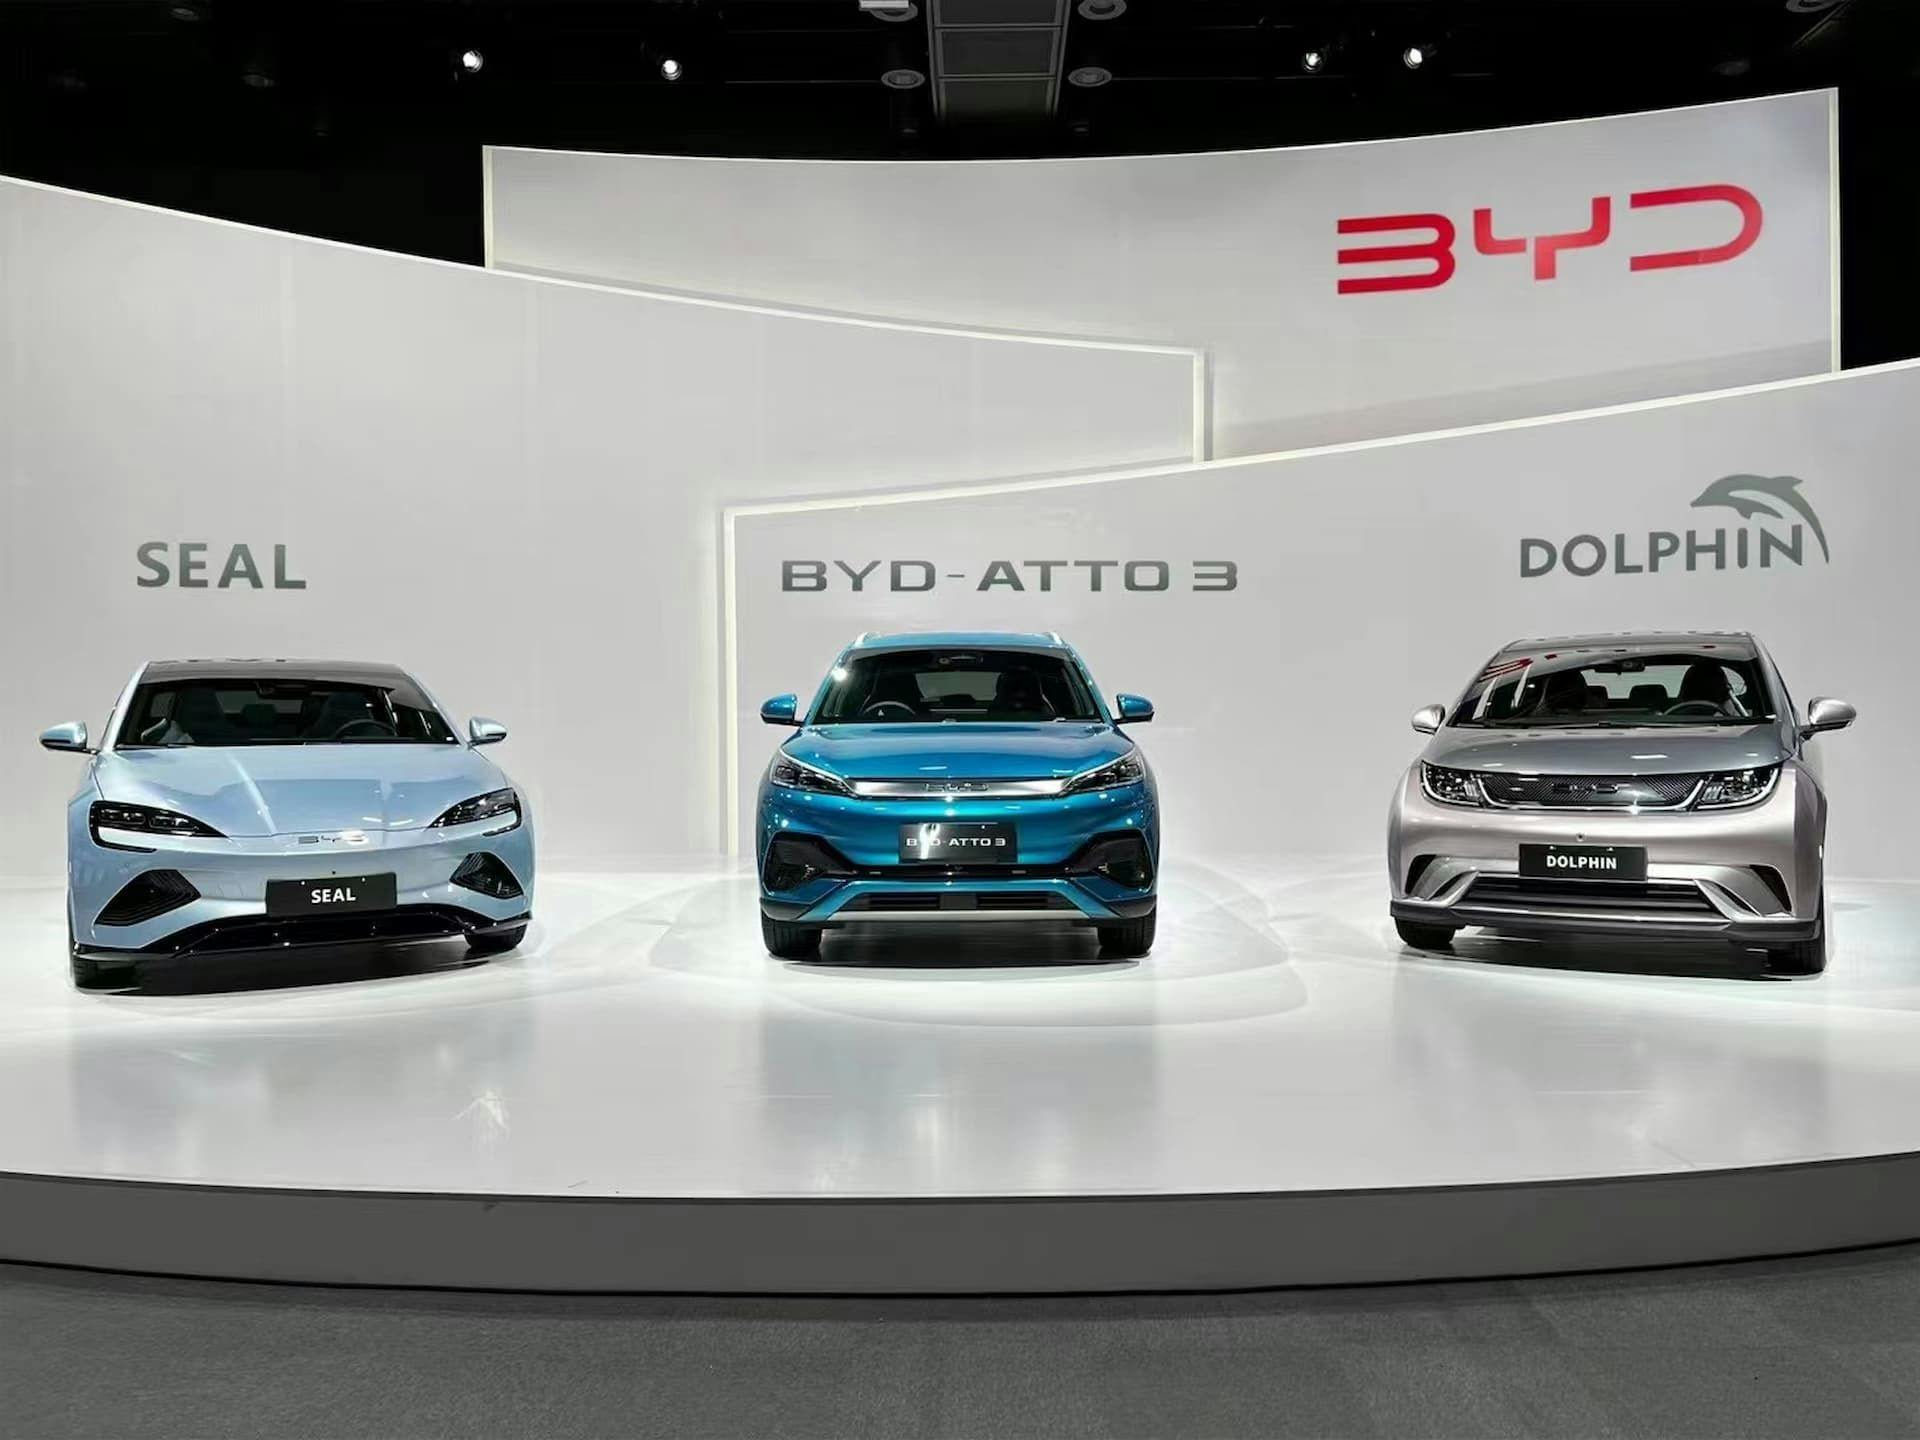 What BYD electric cars are coming to Australia?